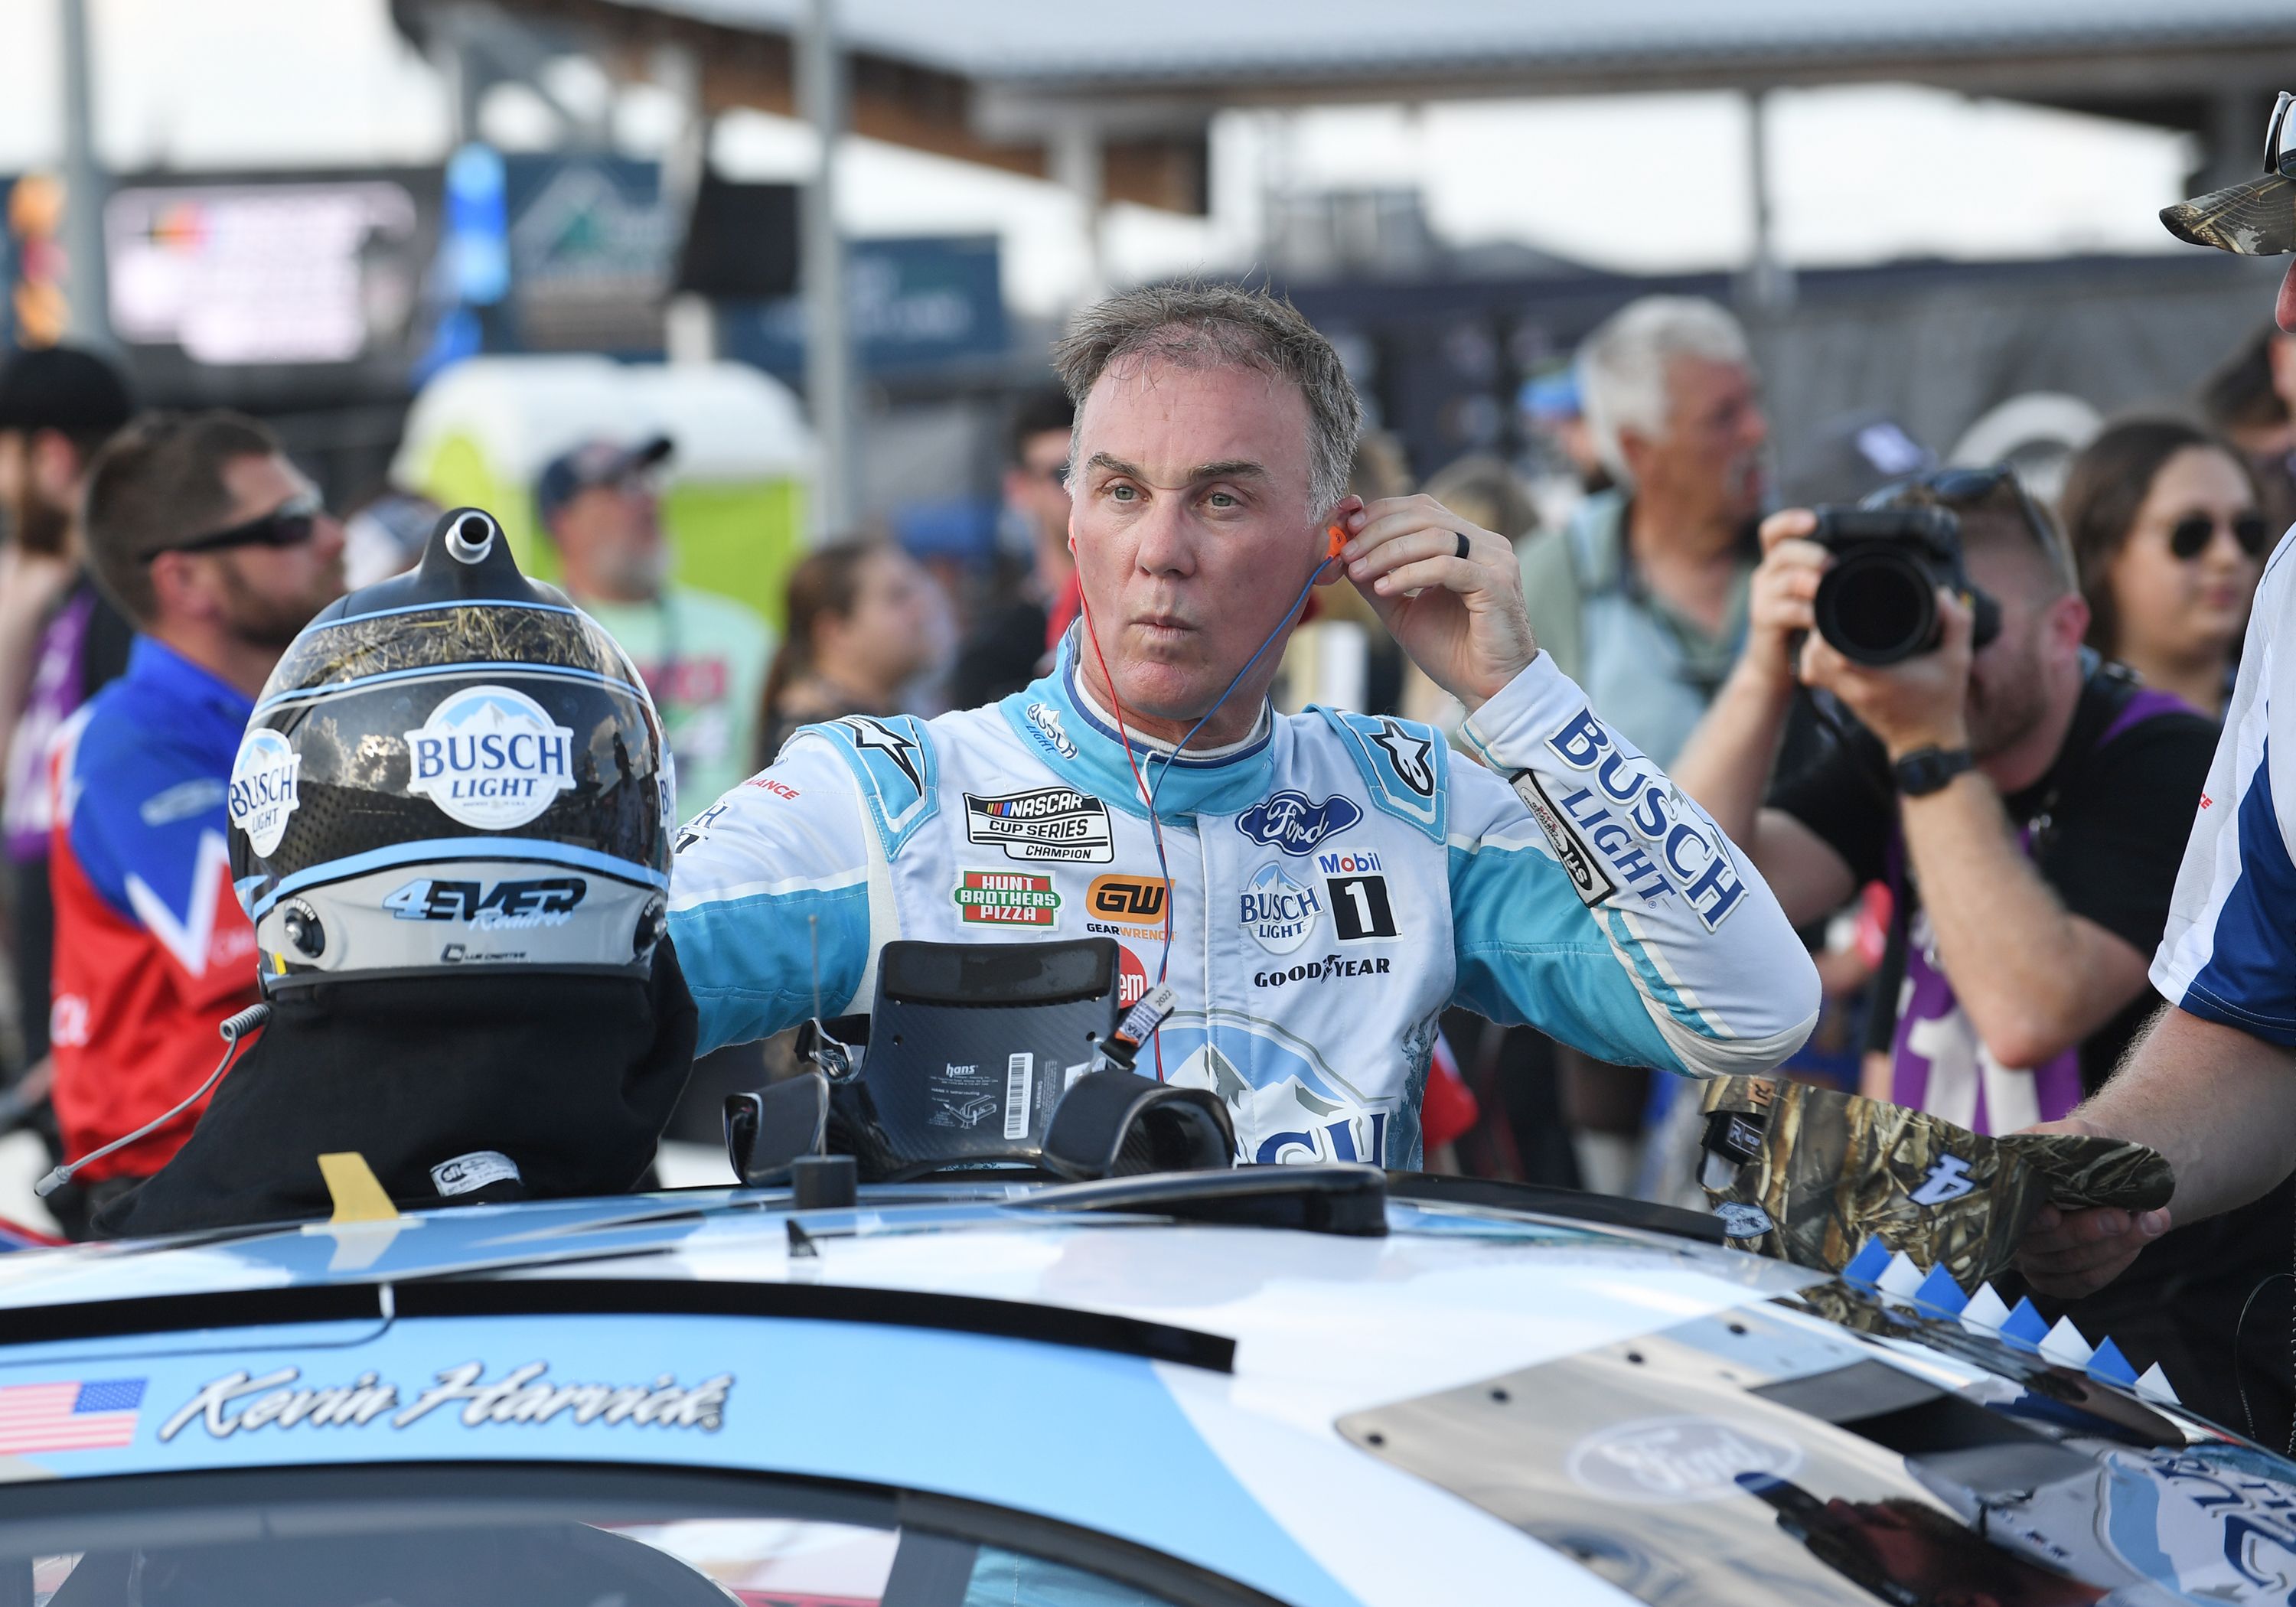 UPDATE Why Kevin Harvick Got Disqualified from NASCAR Cup Race at Talladega